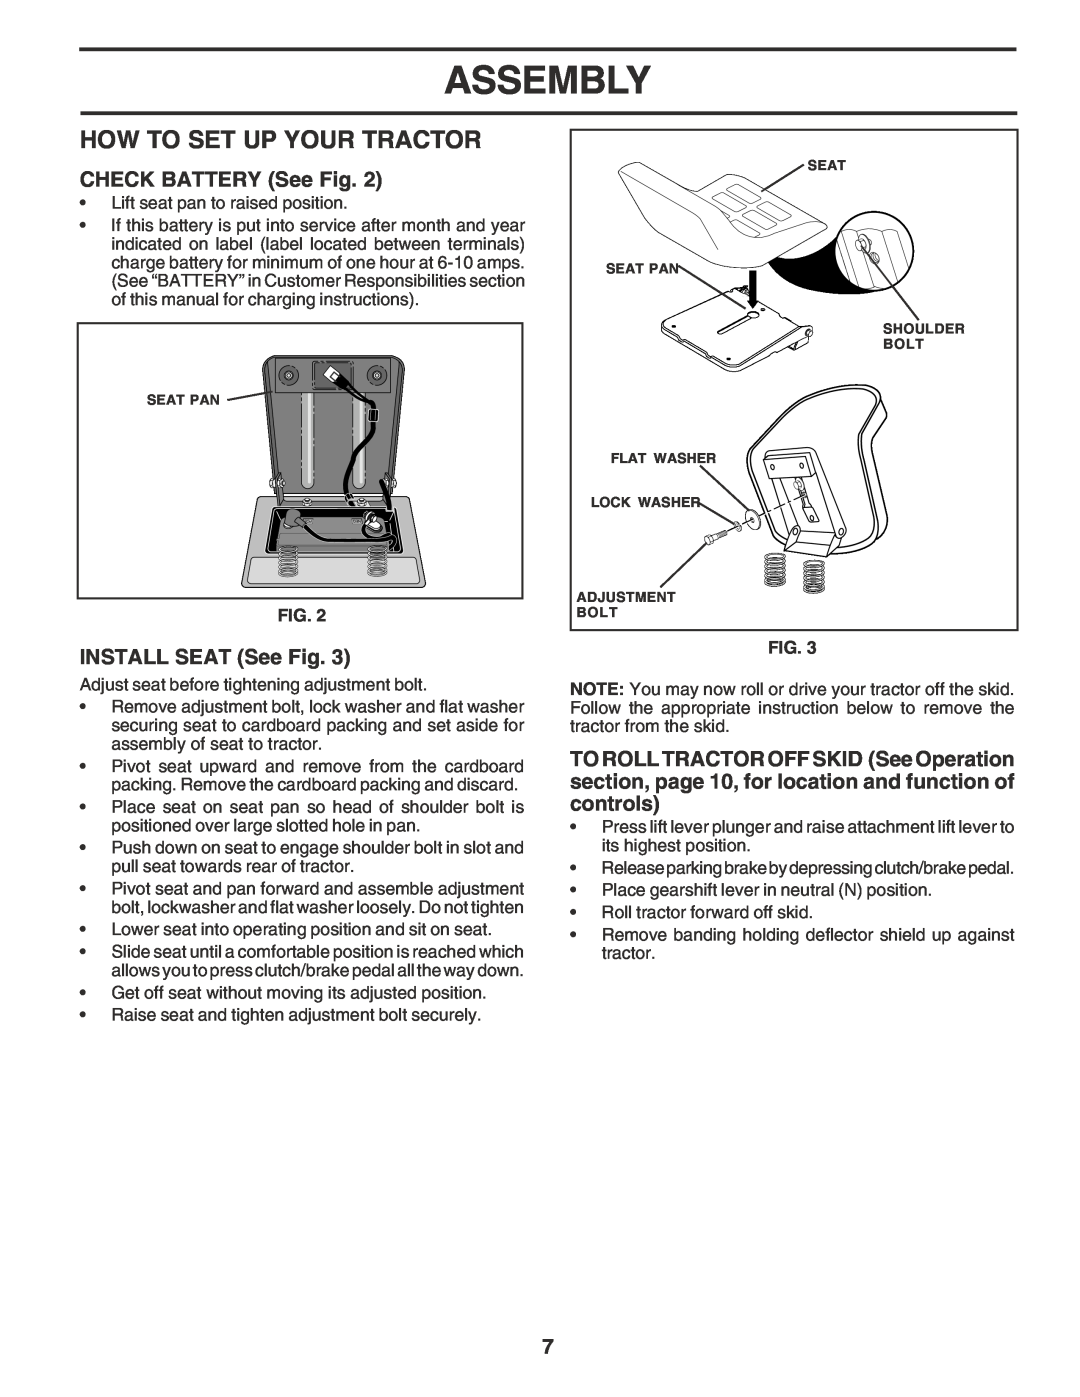 Weed Eater WE1538A manual How To Set Up Your Tractor, CHECK BATTERY See Fig, INSTALL SEAT See Fig, Assembly 